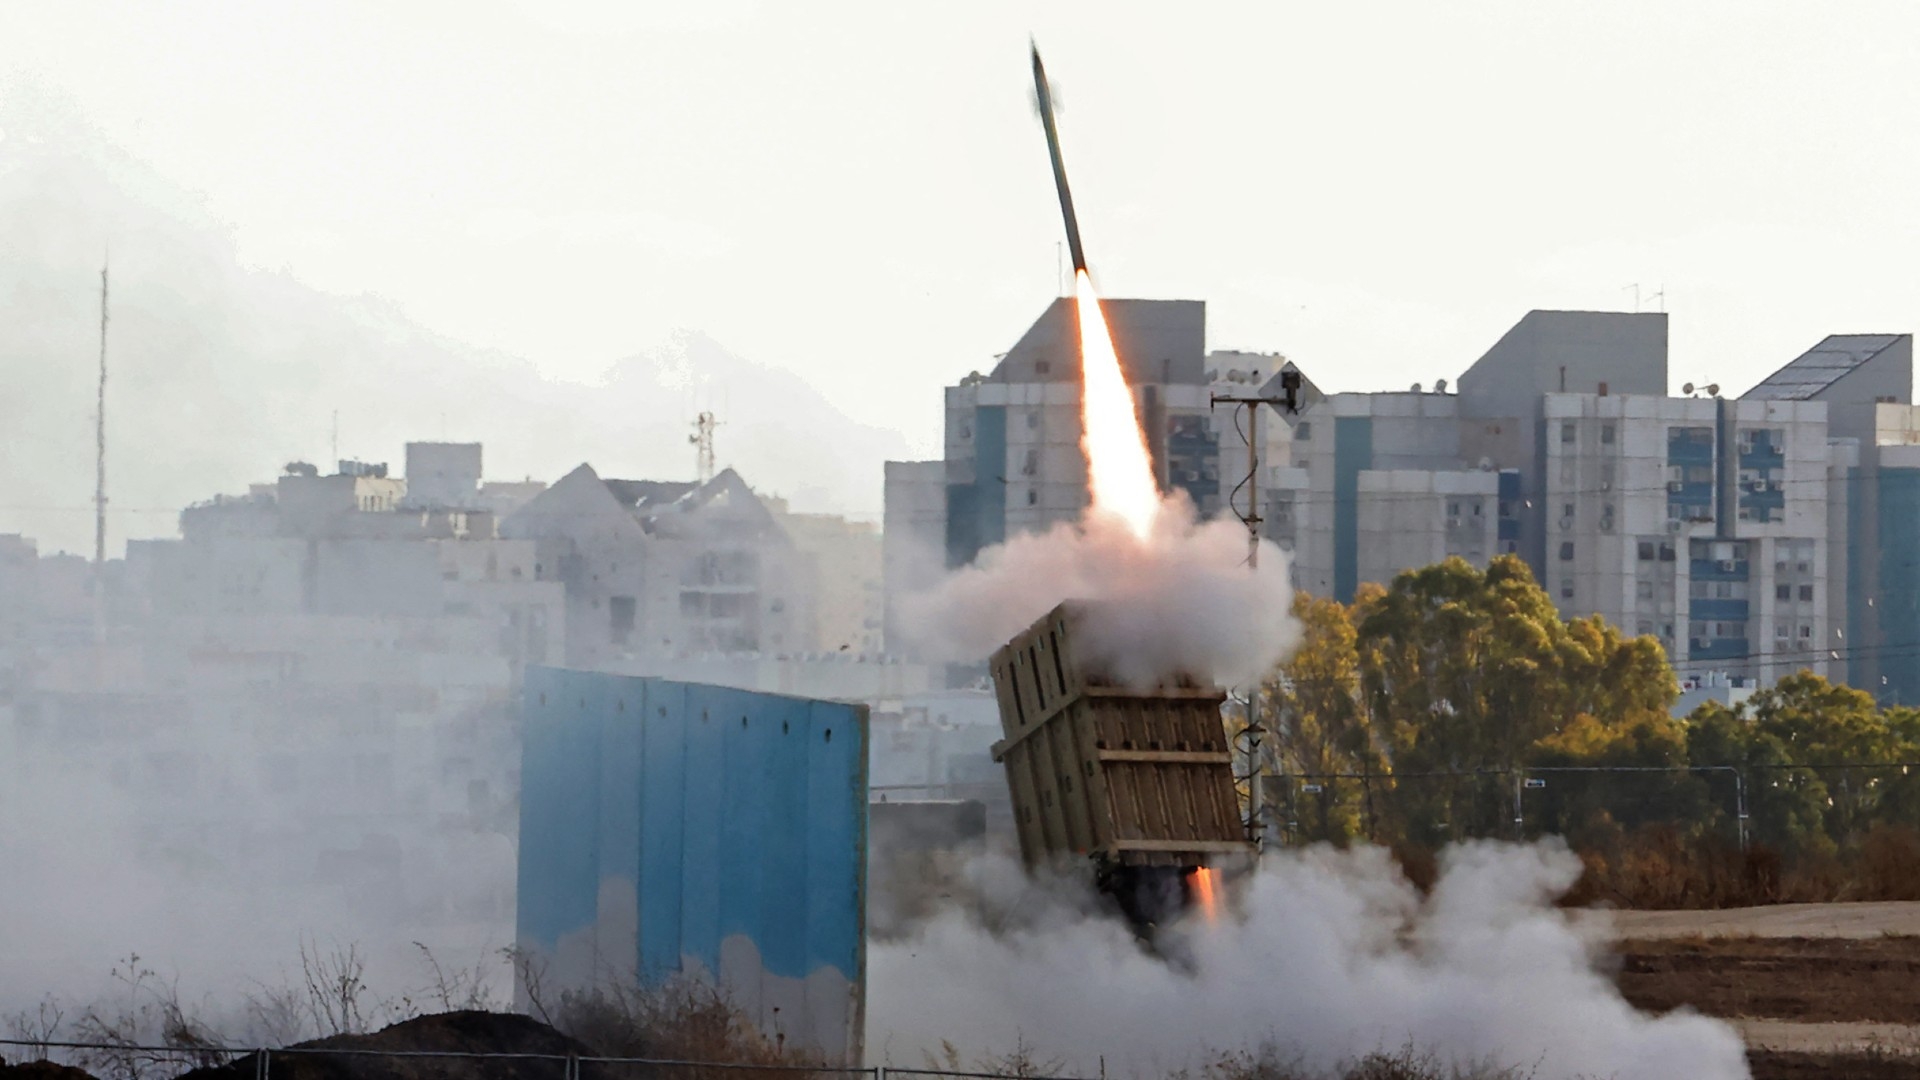 Israel's Iron Dome aerial defence system is launched to intercept a rocket launched from the Gaza Strip, above the southern Israeli city of Ashdod, on 17 May 2021.